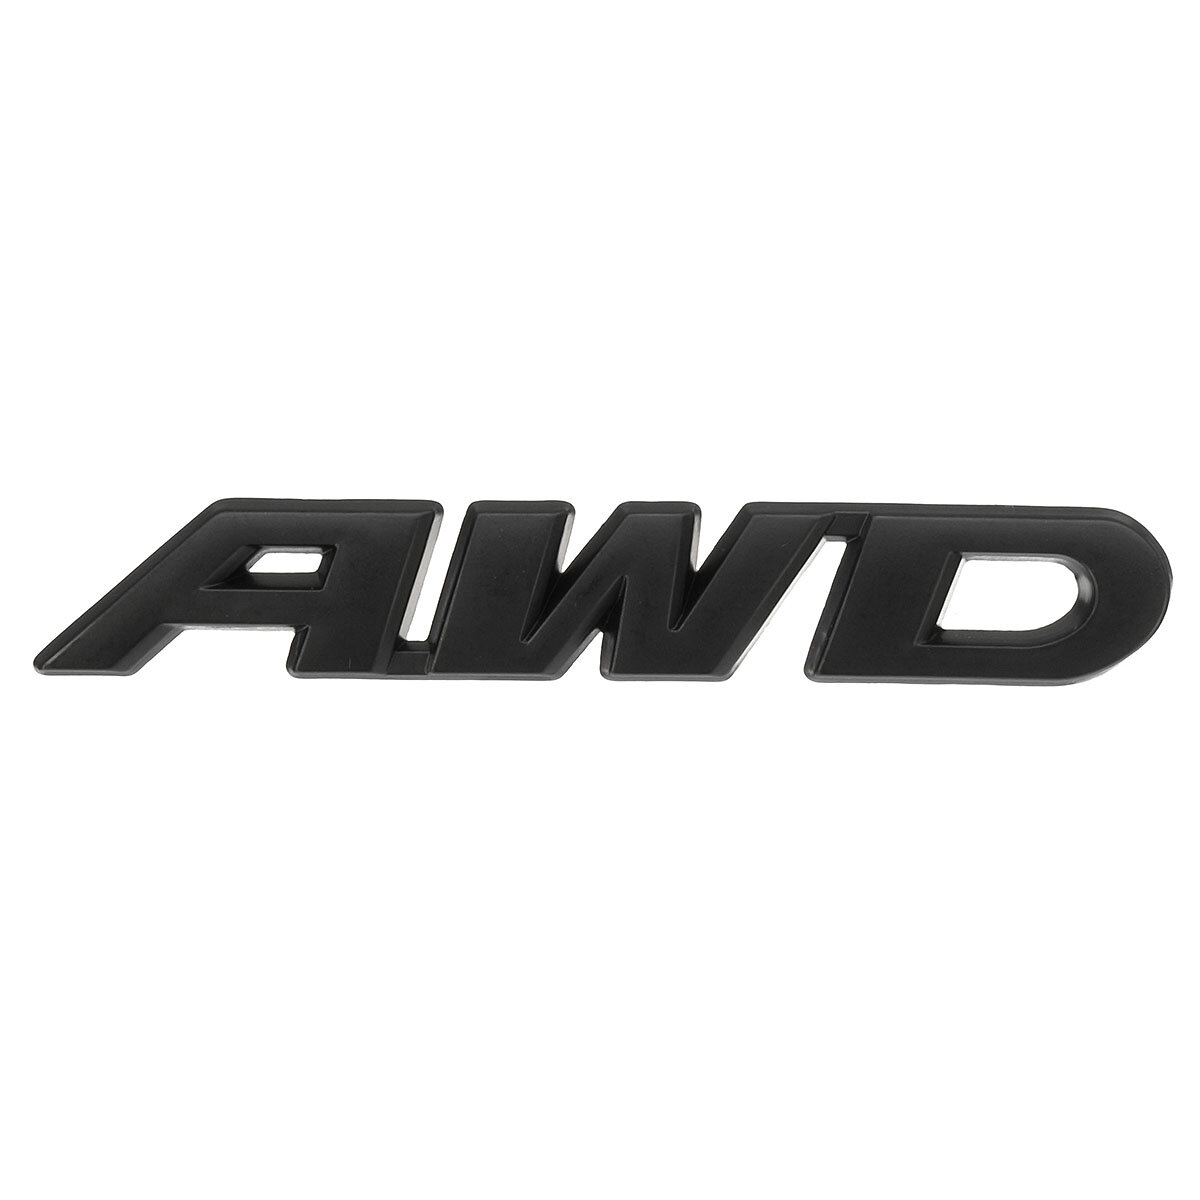 Silver AWD Car SUV Metal Emblem Sticker Badge Decal for 4 Wheel Drive Tailgate